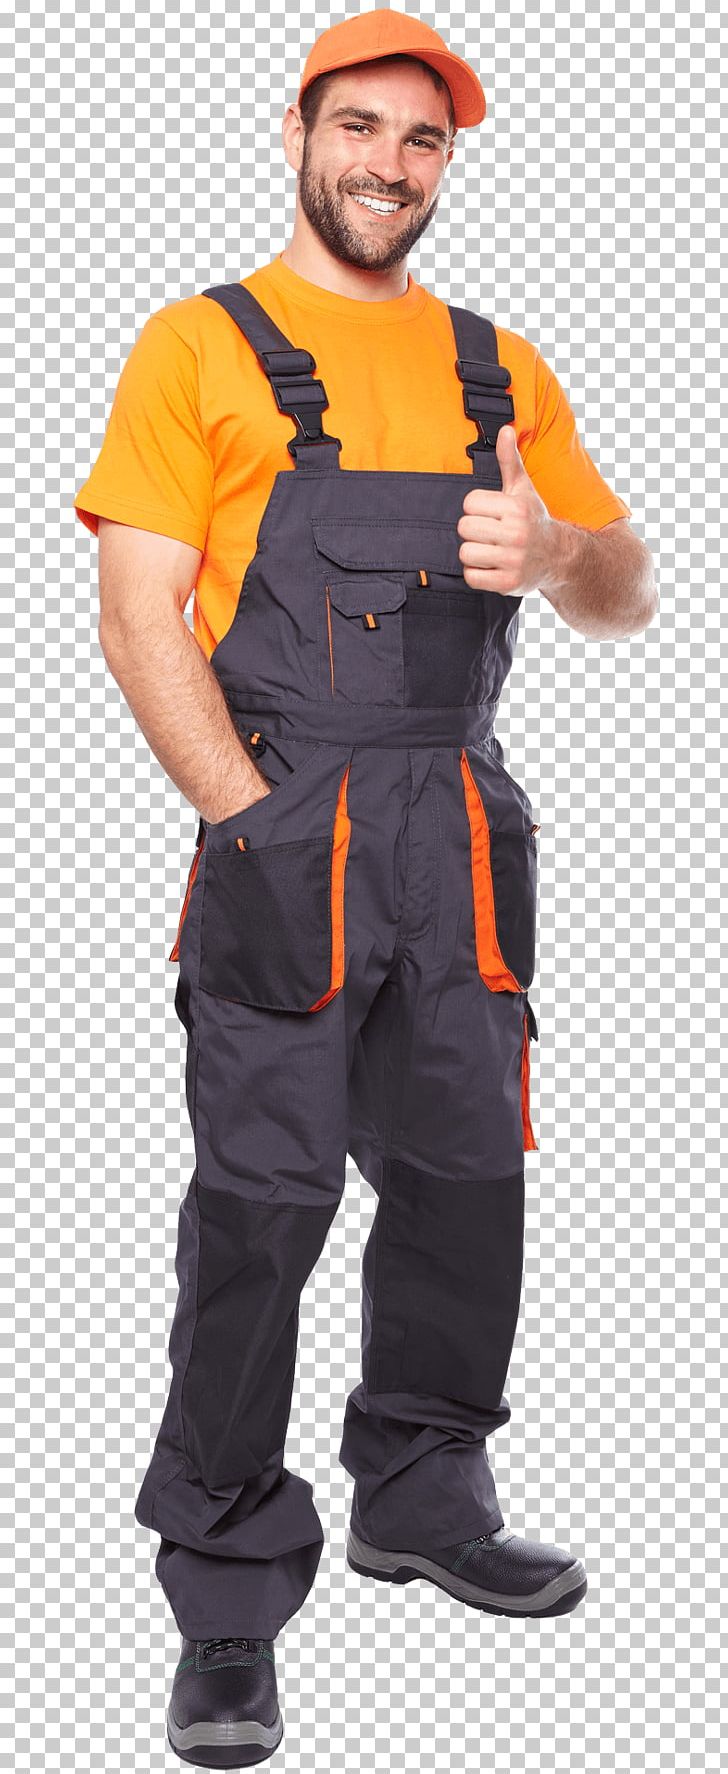 Construction Worker Glazier Laborer Glazing Construction Foreman PNG, Clipart, Architectural Engineering, Artisan, Award, Blue Collar Worker, Climbing Harness Free PNG Download